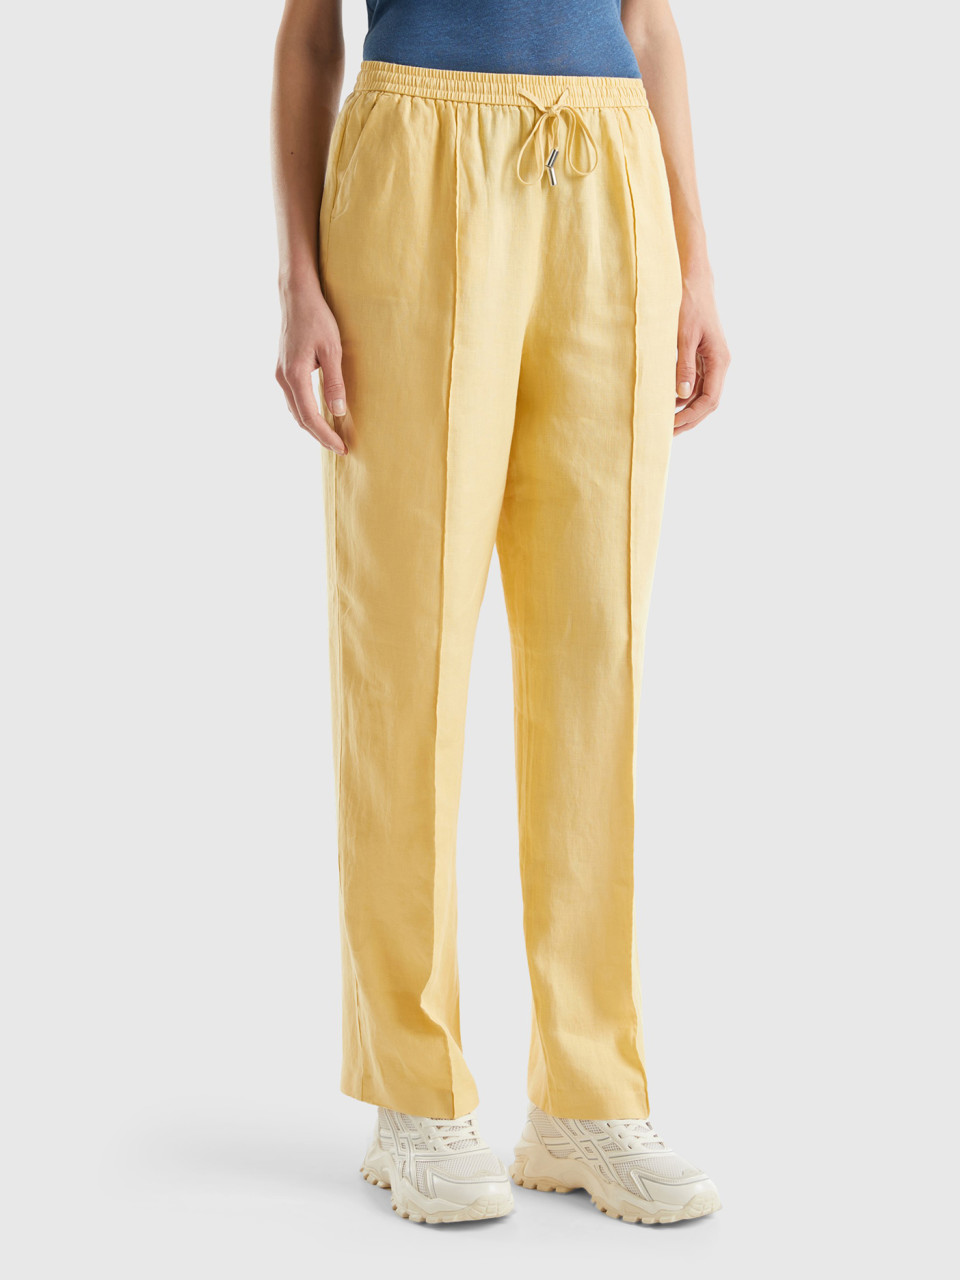 Benetton, Trousers In Pure Linen With Elastic, Yellow, Women